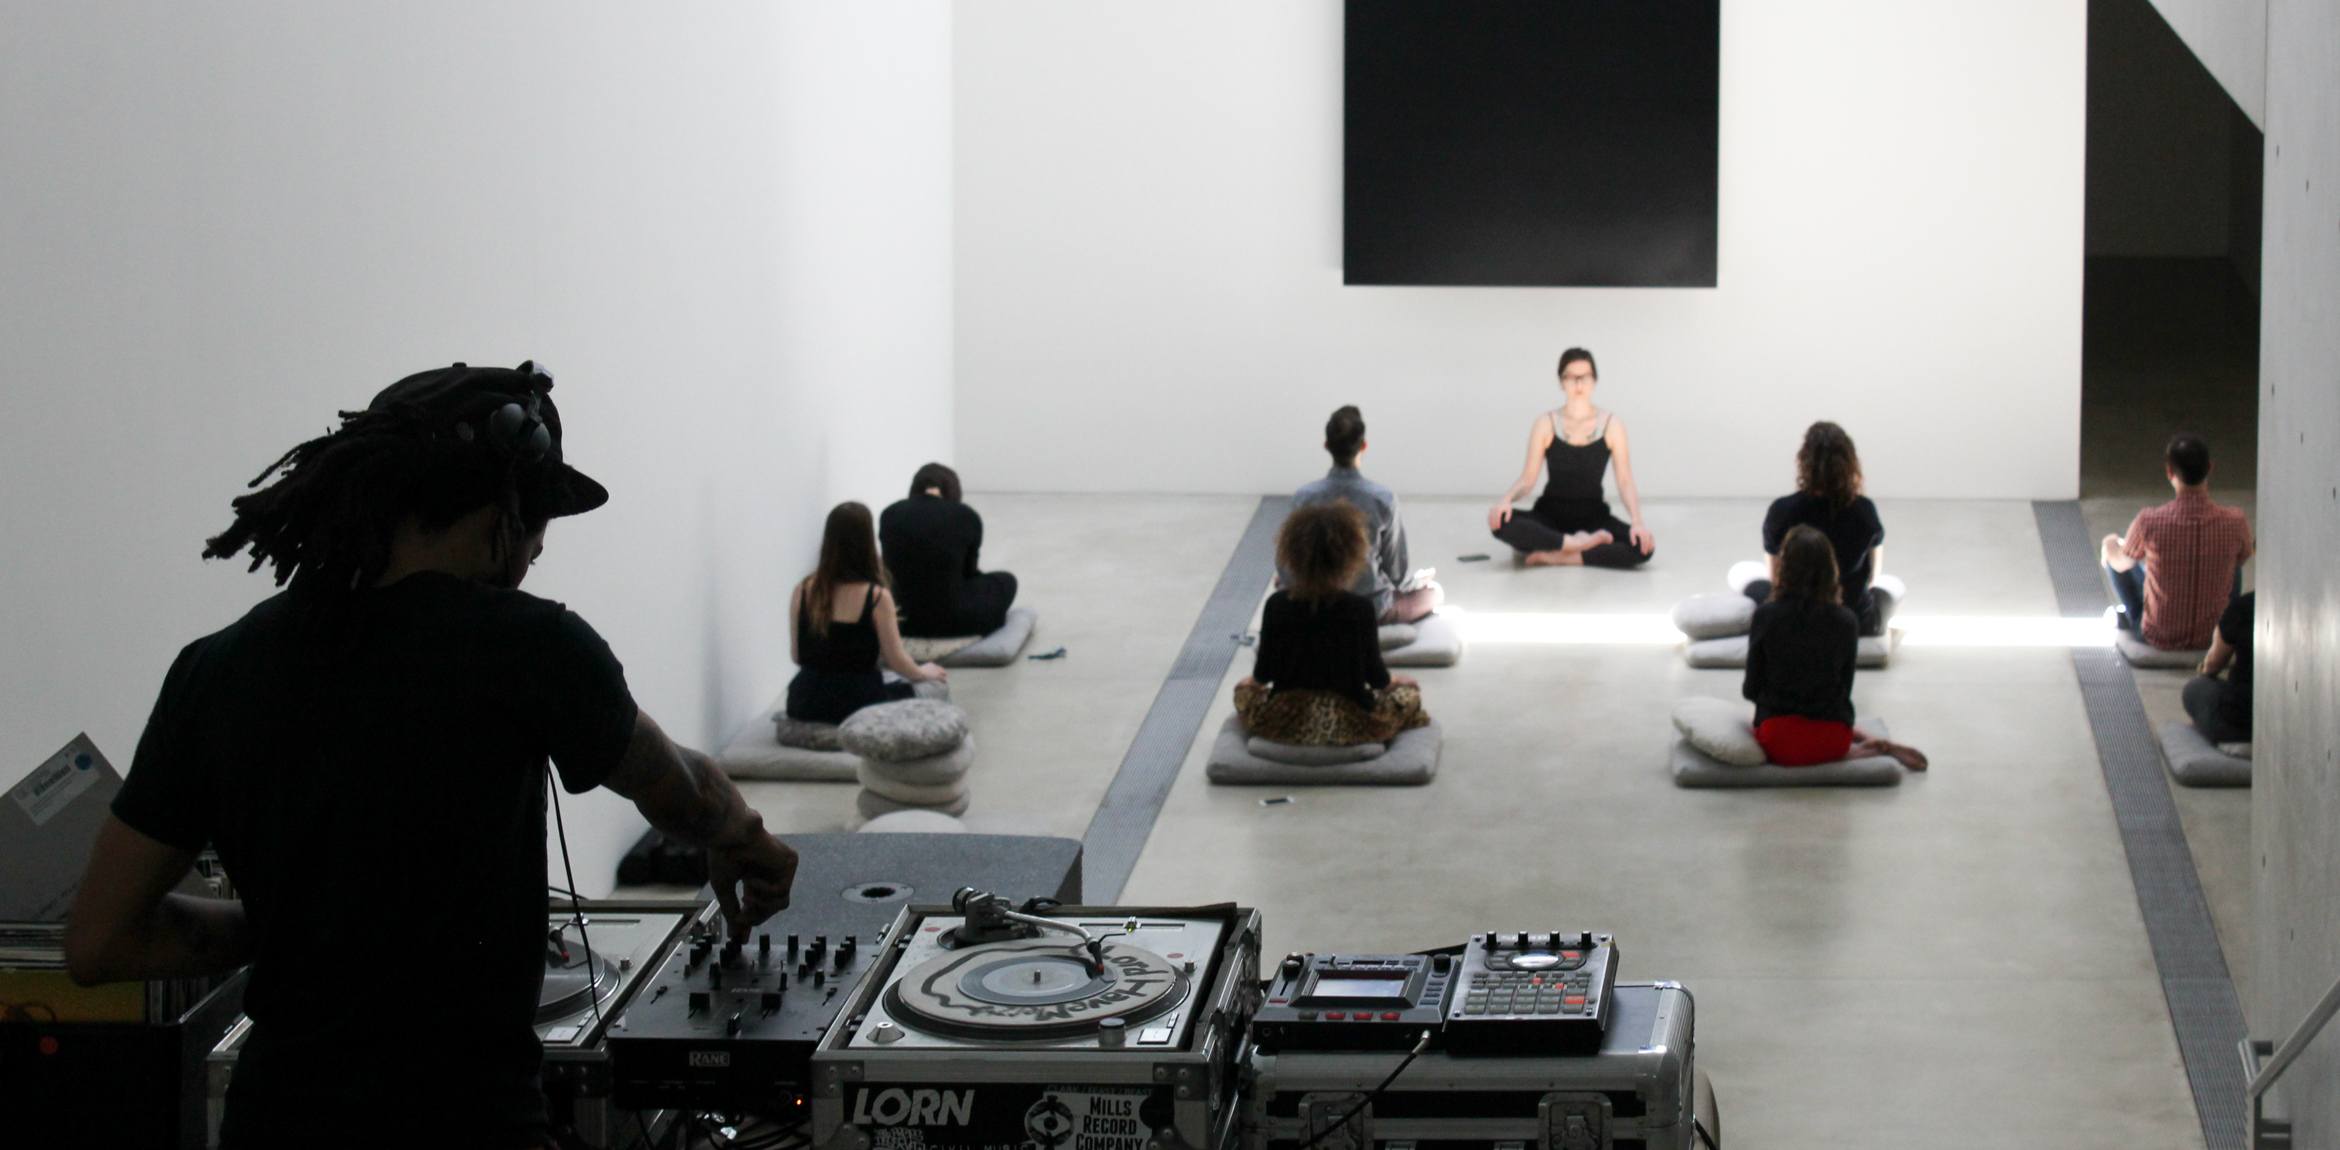 A DJ plays music on the Main Staircase as yoga instructor leads a group of people seated on pillows, in front of Ellsworth Kelly's "Blue Black."